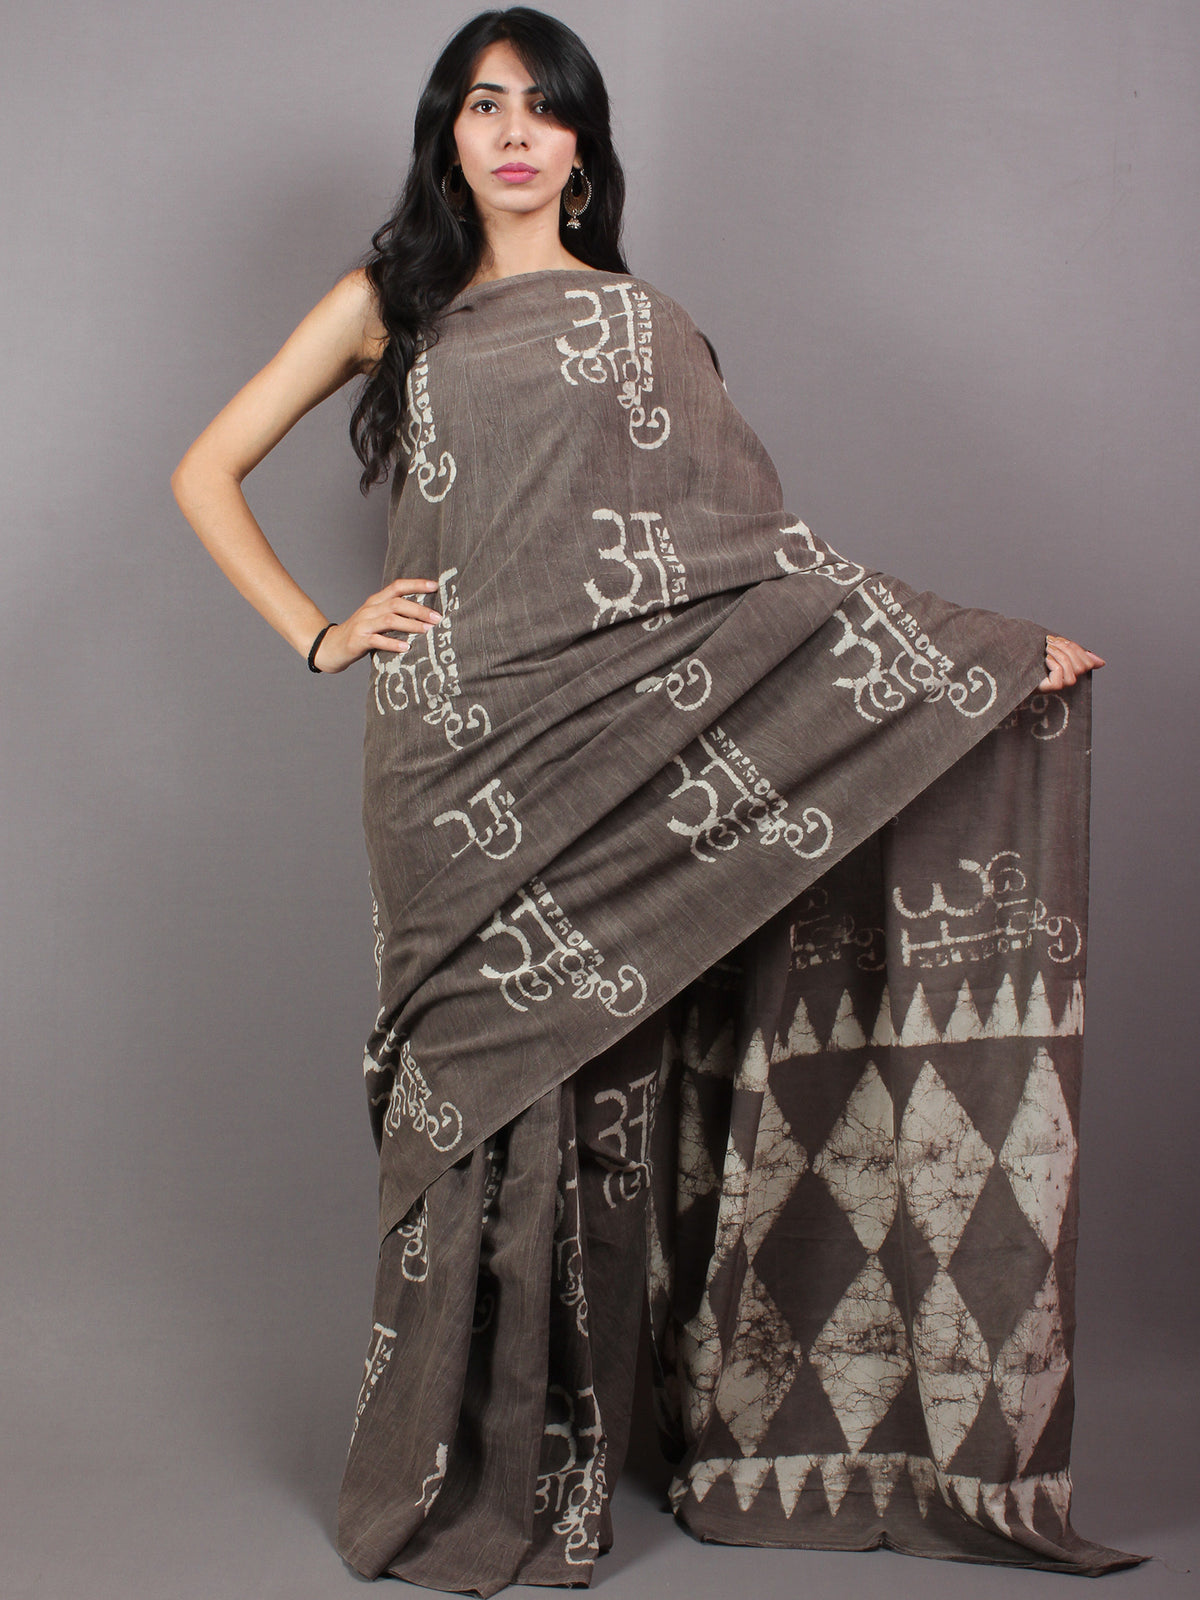 Fossil Grey Ivory Hand Block Printed in Natural Colors Cotton Mul Saree With Shaded Texture - S03170633